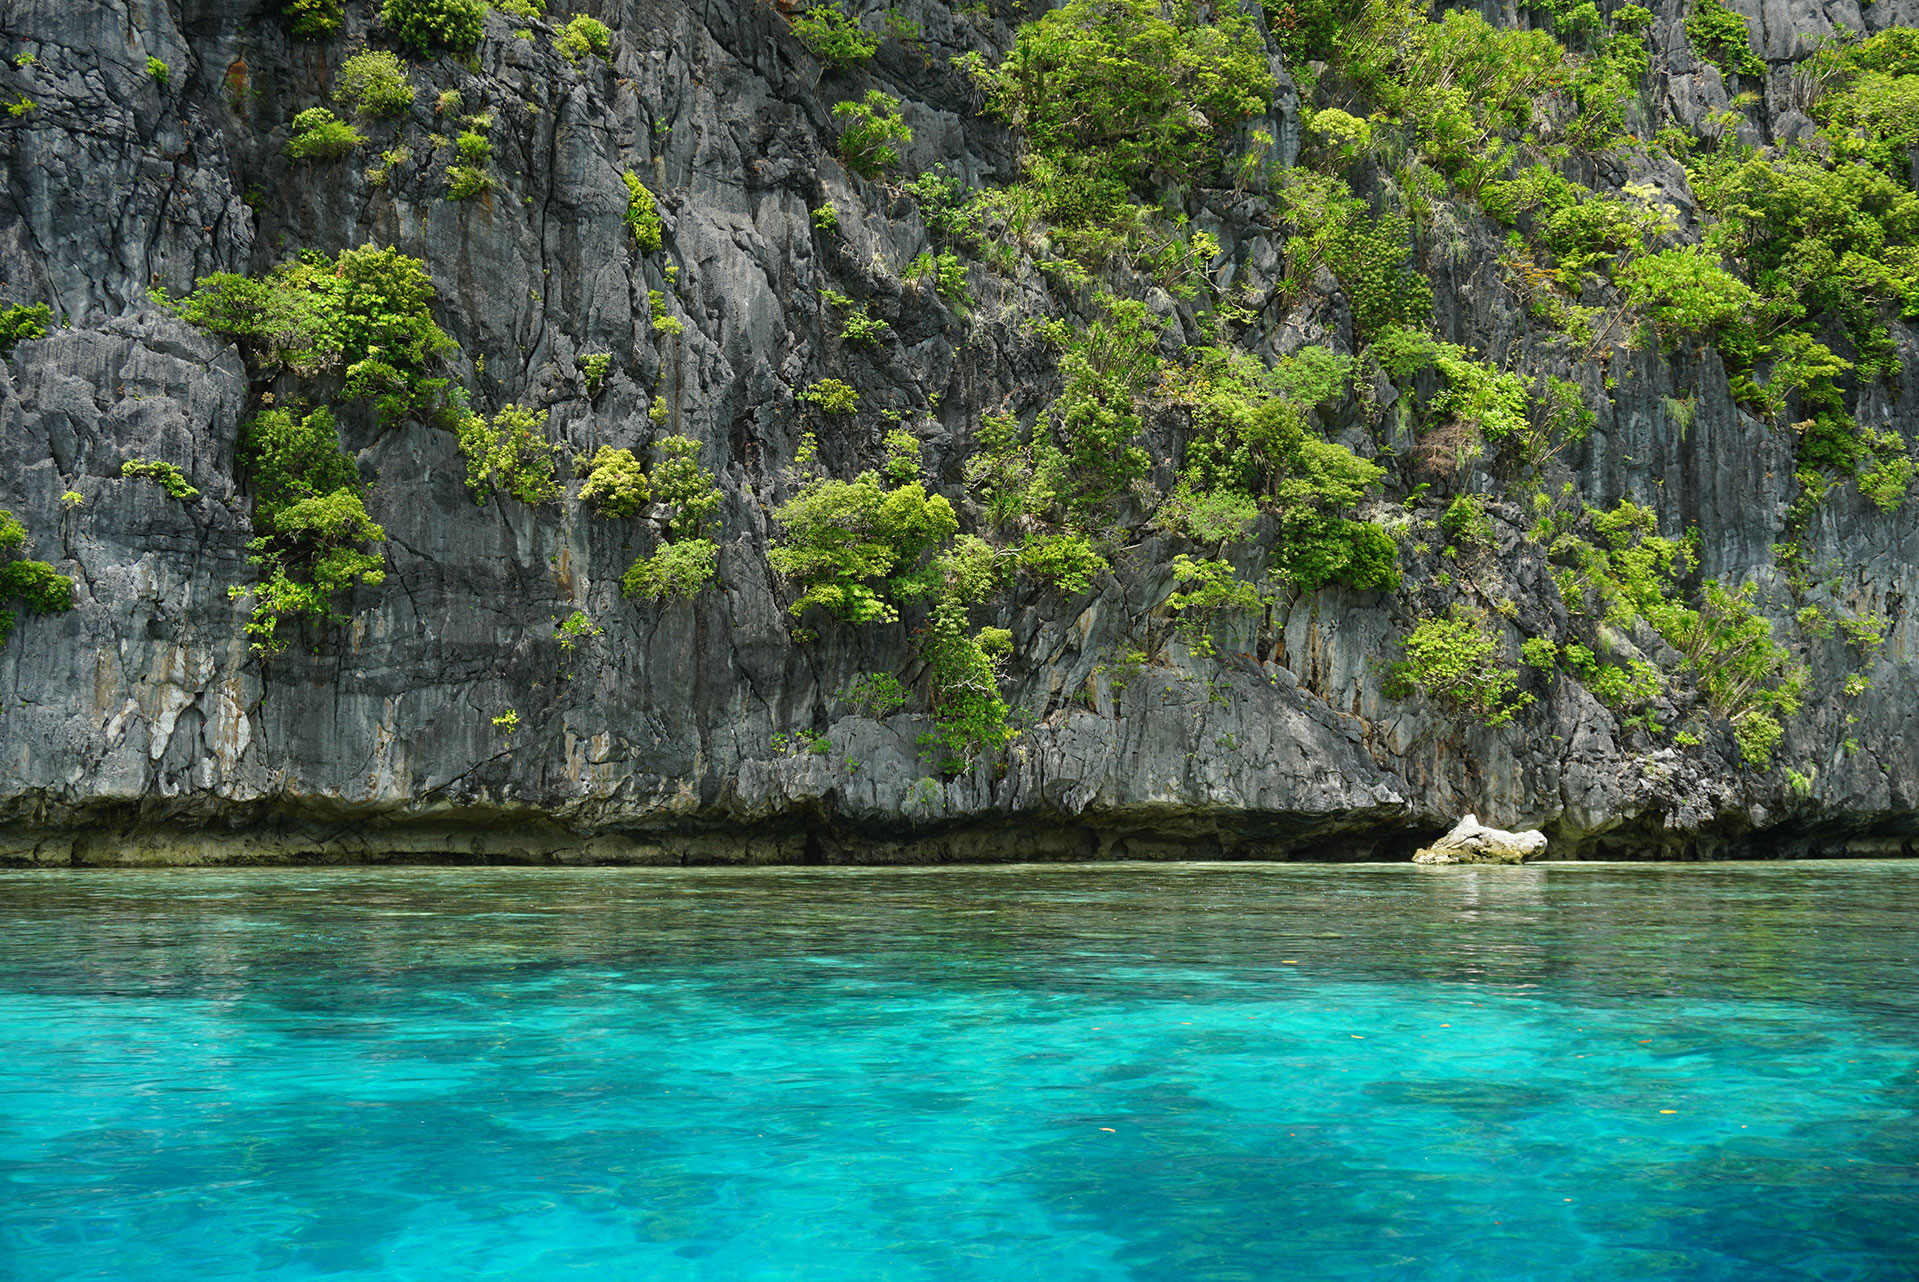 Turquoise water Island Hopping in El Nido